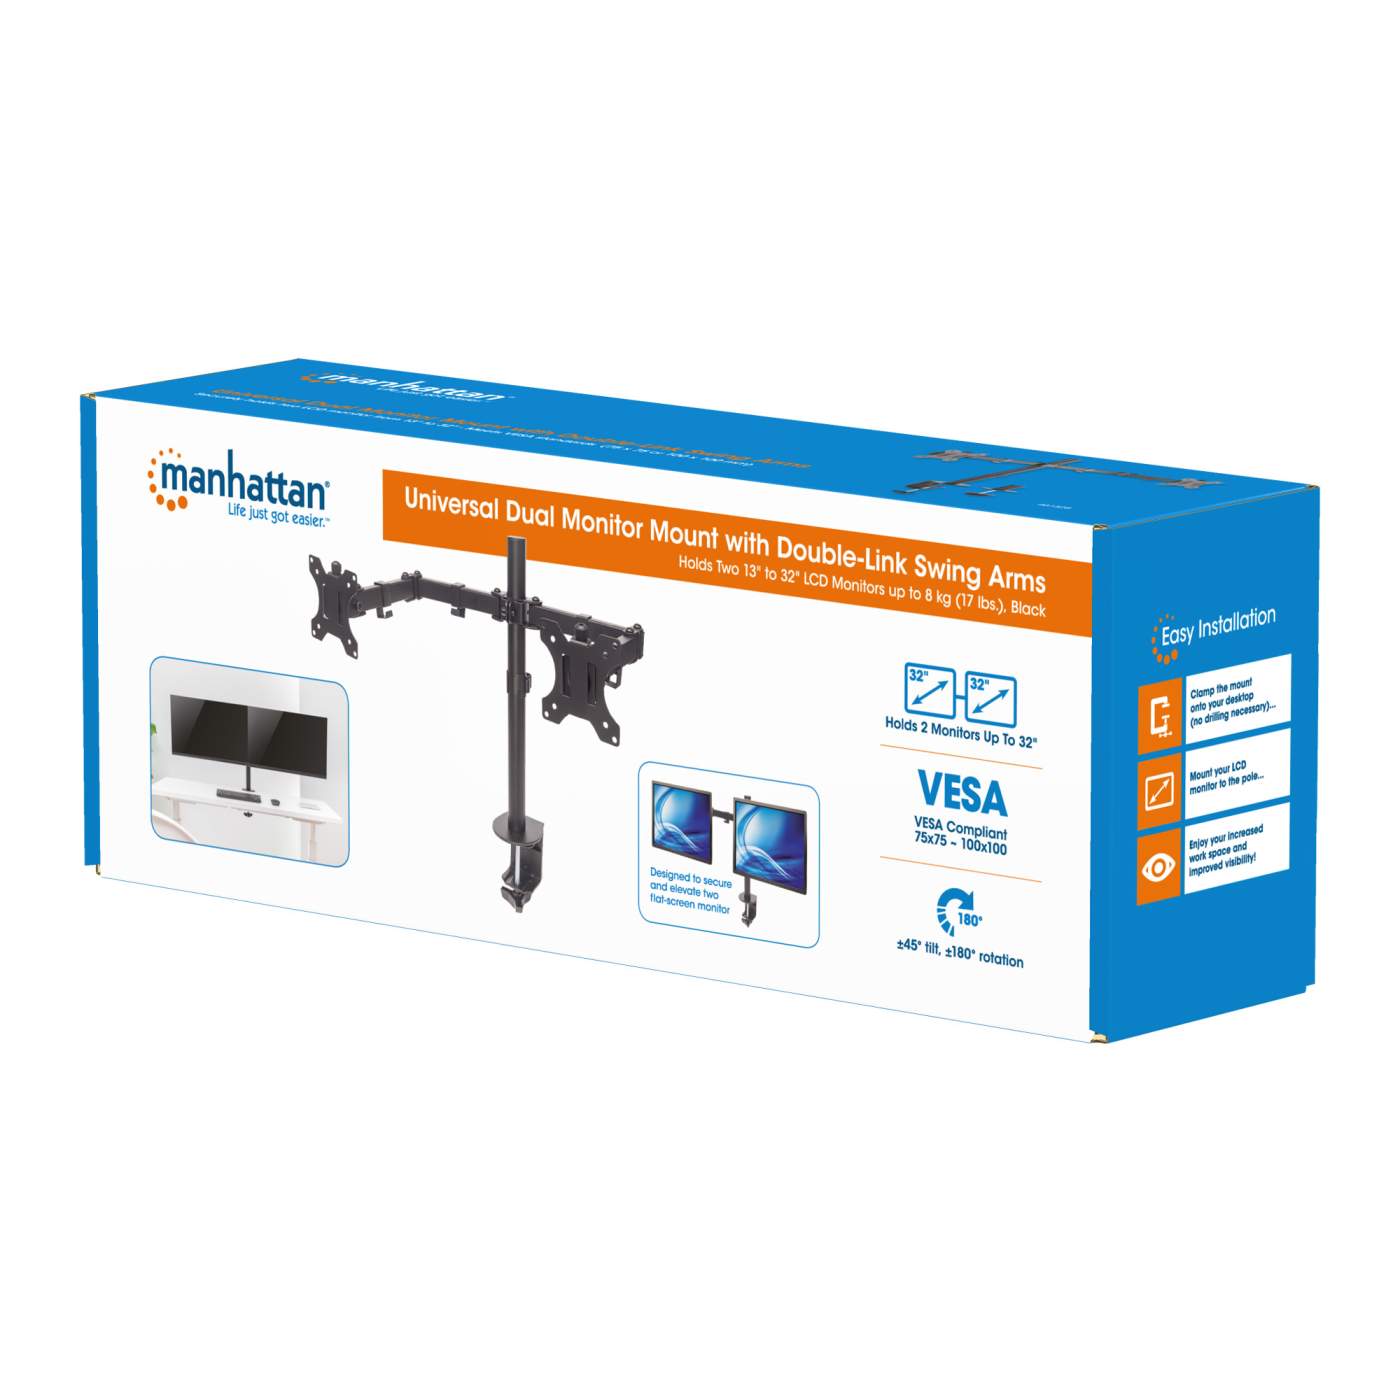 Universal Dual Monitor Mount with Double-Link Swing Arms Packaging Image 2